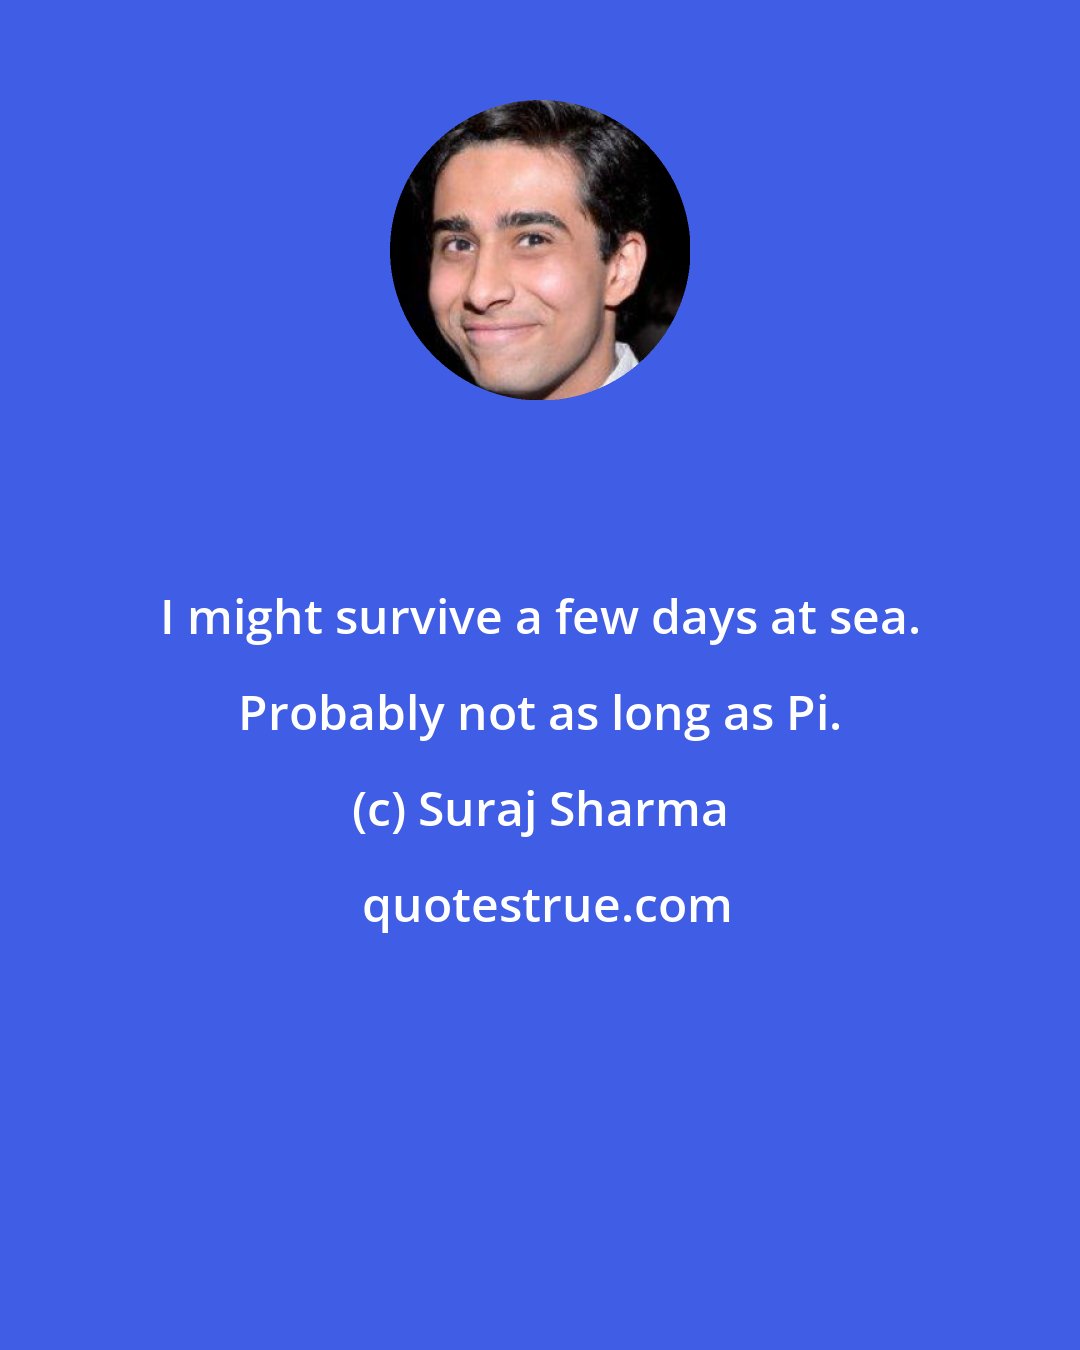 Suraj Sharma: I might survive a few days at sea. Probably not as long as Pi.